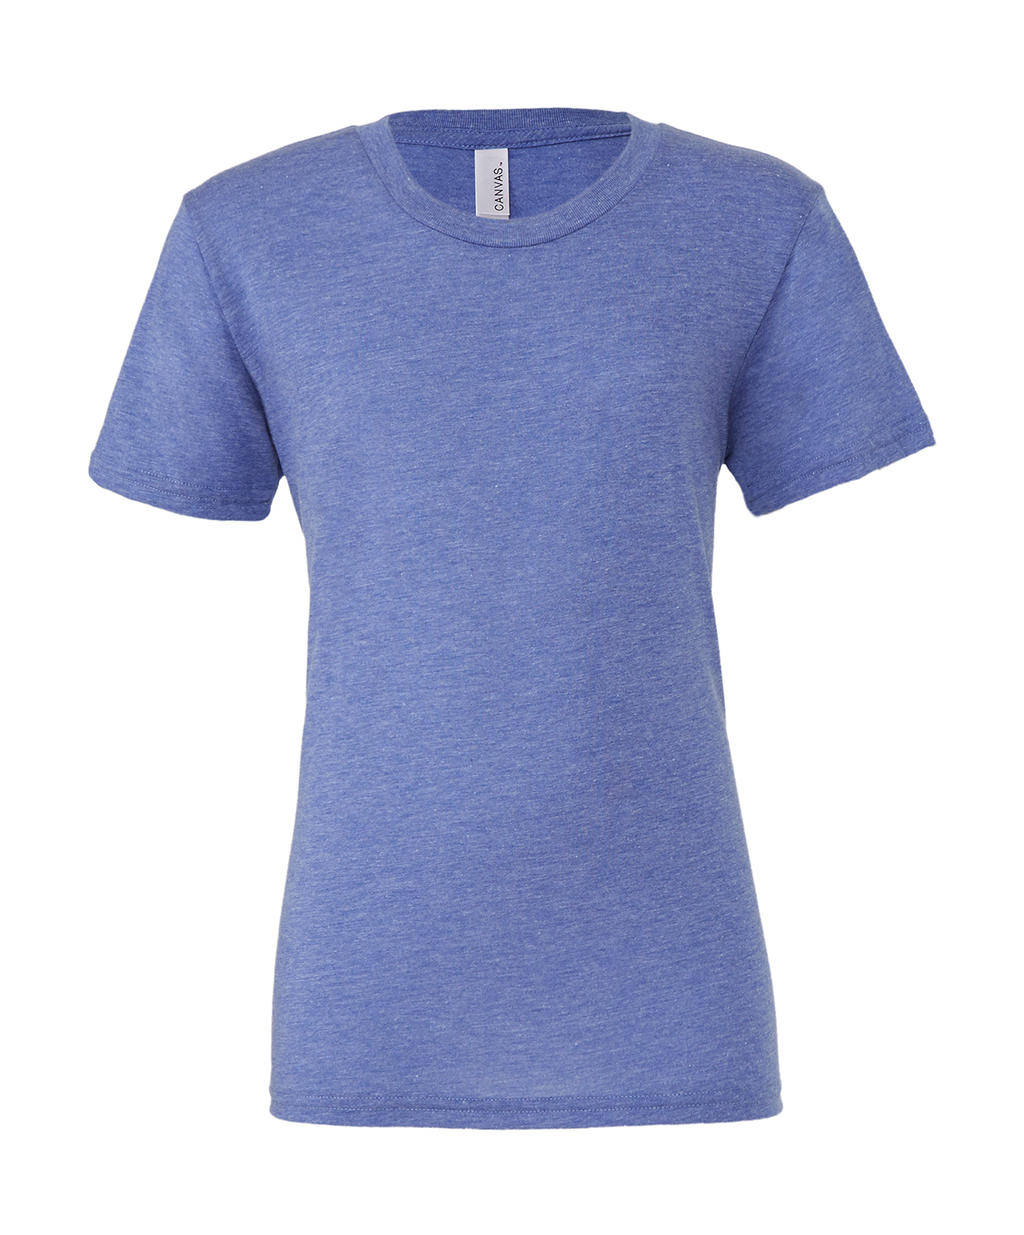  Unisex Triblend Short Sleeve Tee in Farbe Blue Triblend